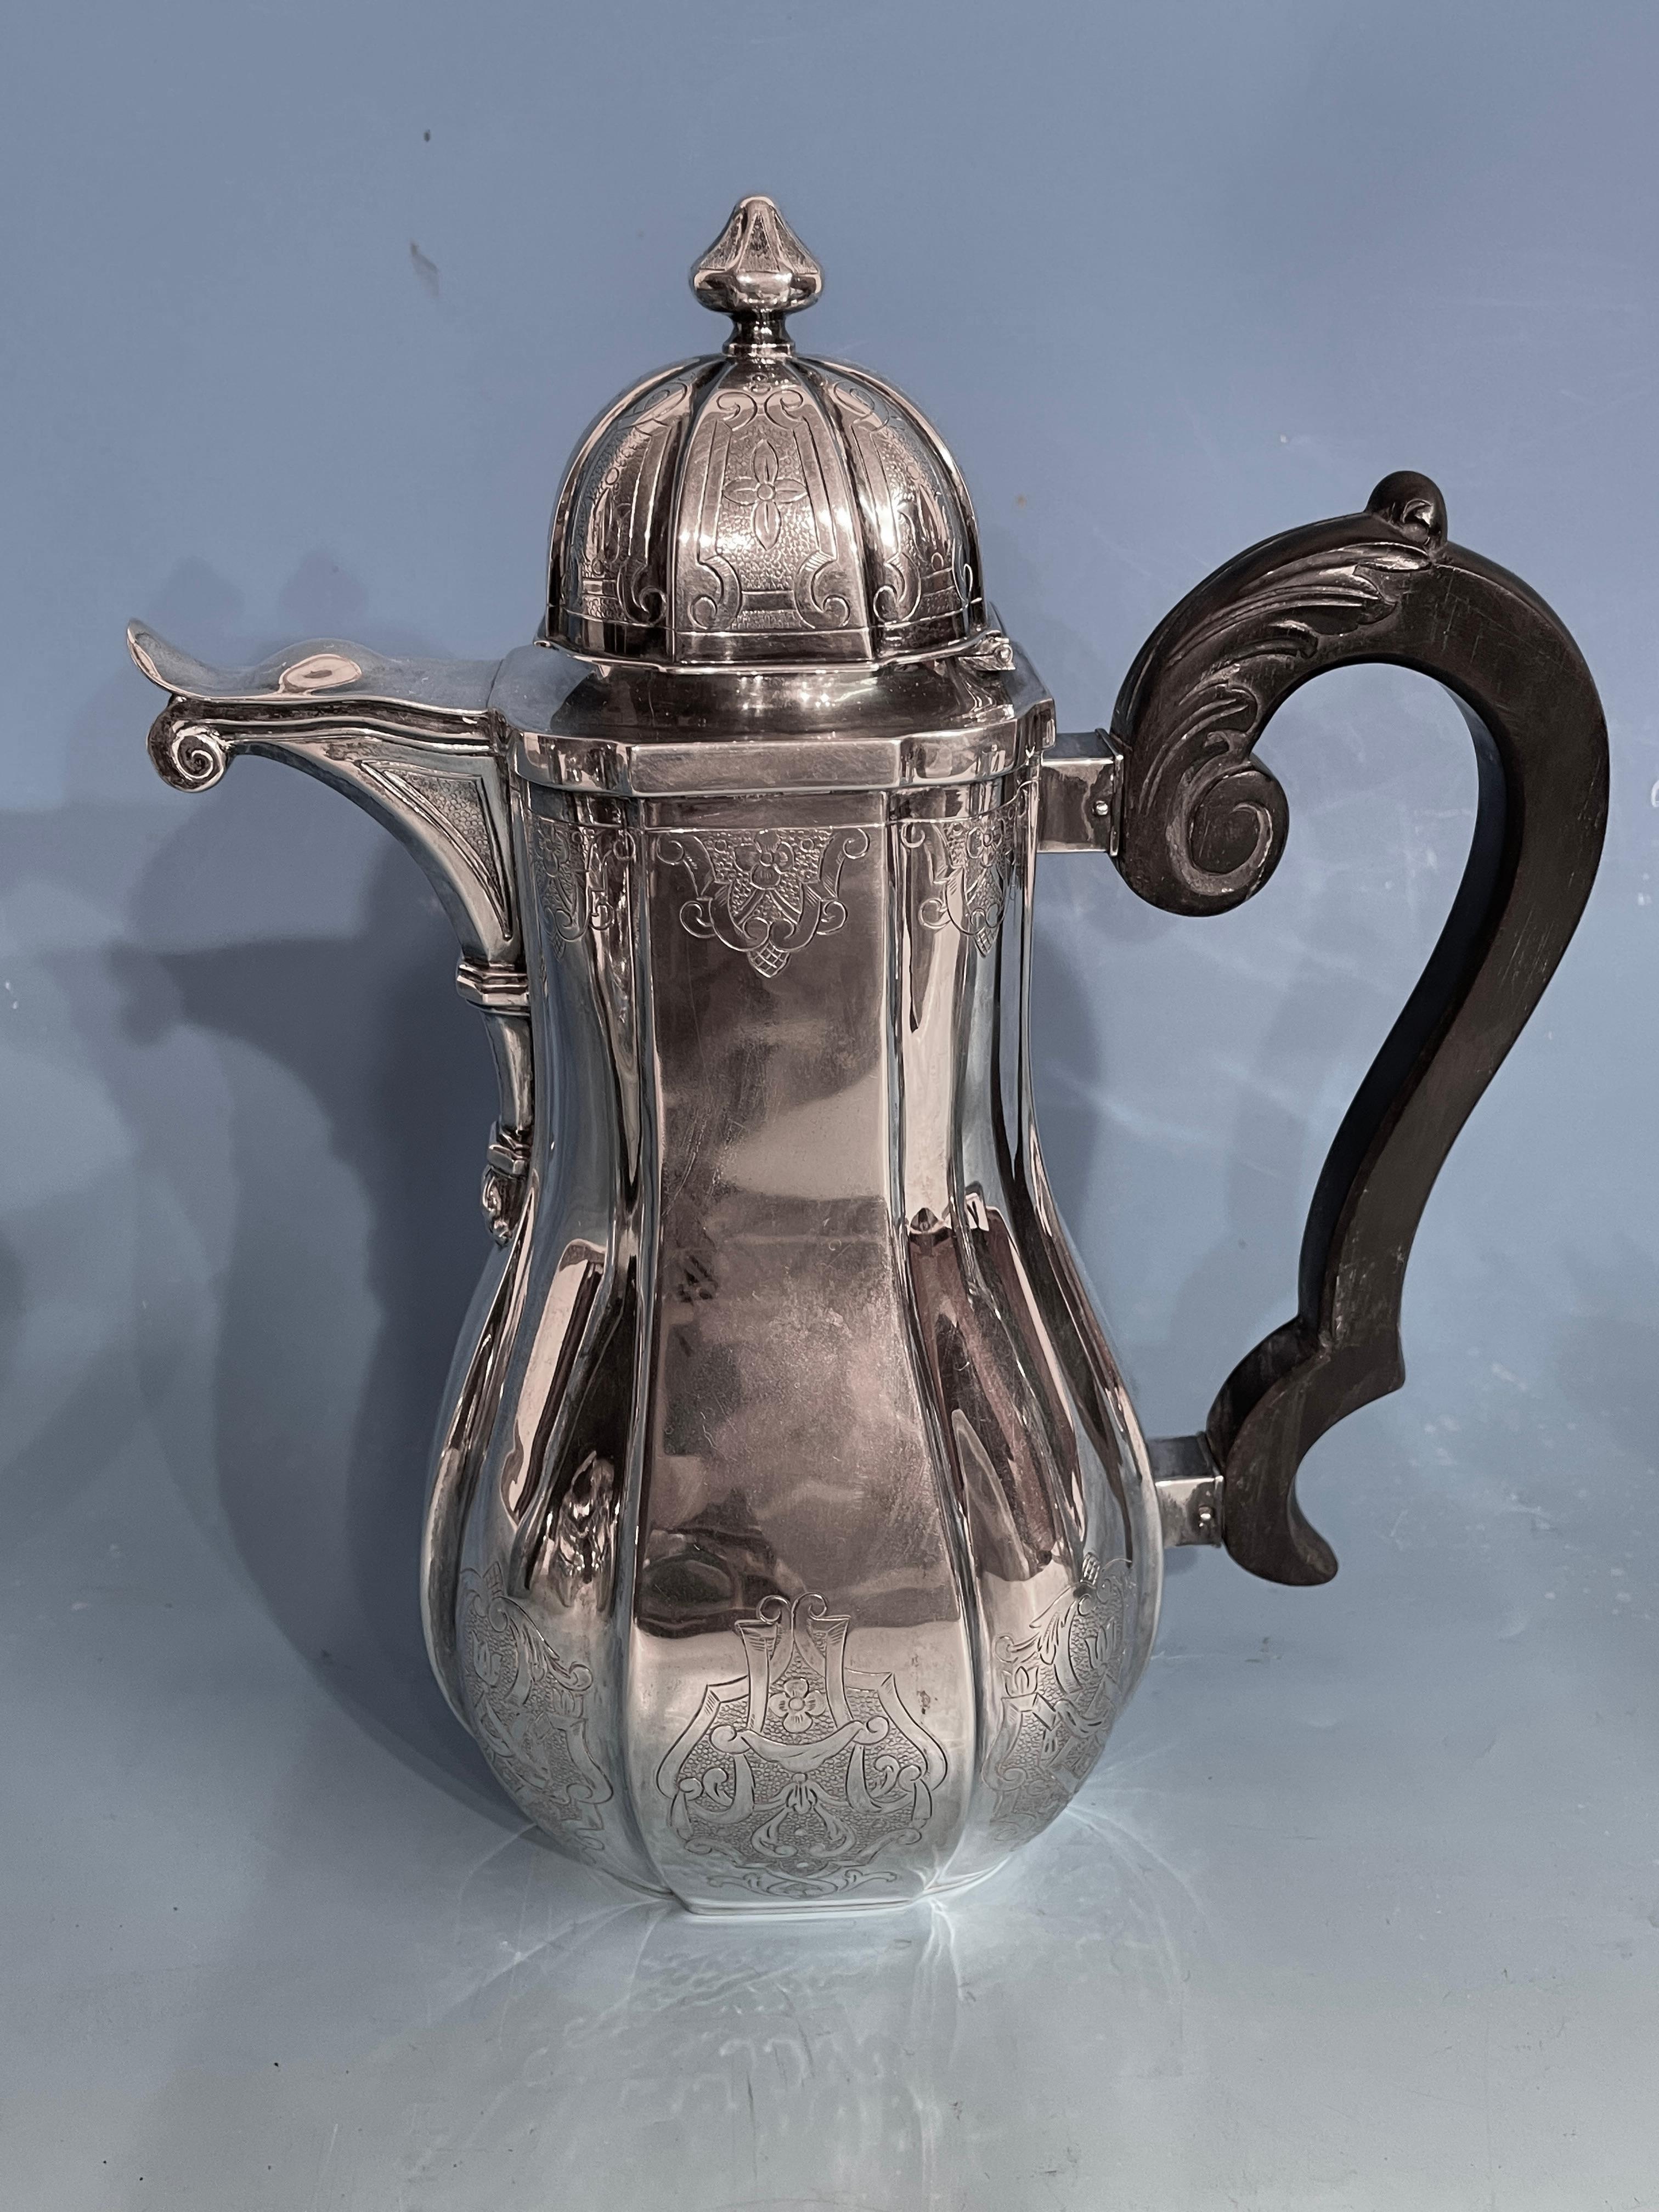 Silver coffee and tea set, Belgium 19th century
The design of this beautiful coffee and tea set is inspired by the 18th century French Regence style. The pear shaped pieces are decorated with fine latticework. The coffee, tea and milk pot have